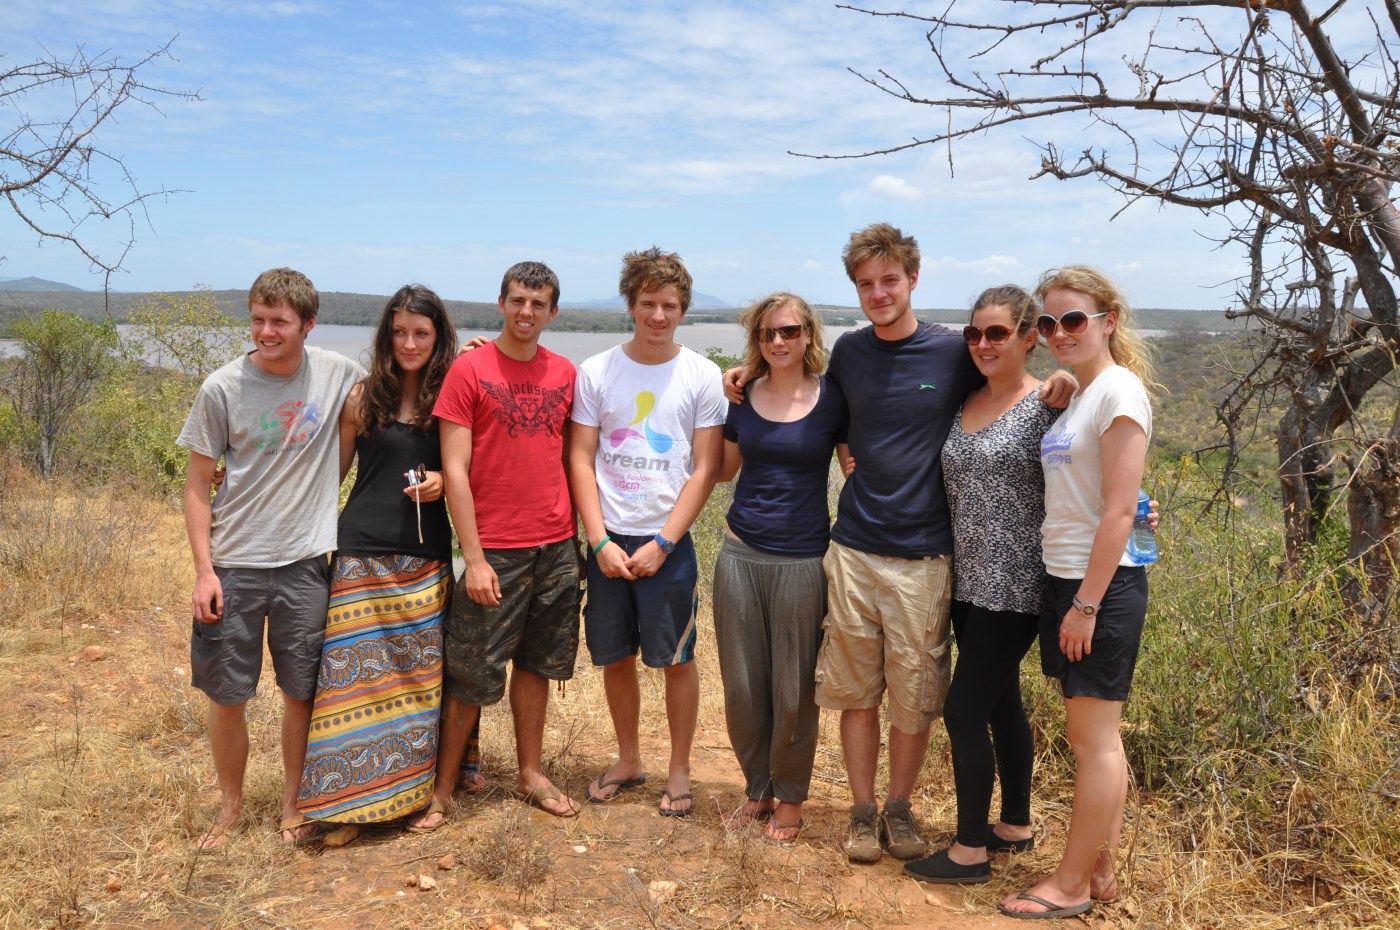 Gap year advice for parents - ensure your child travels in a group